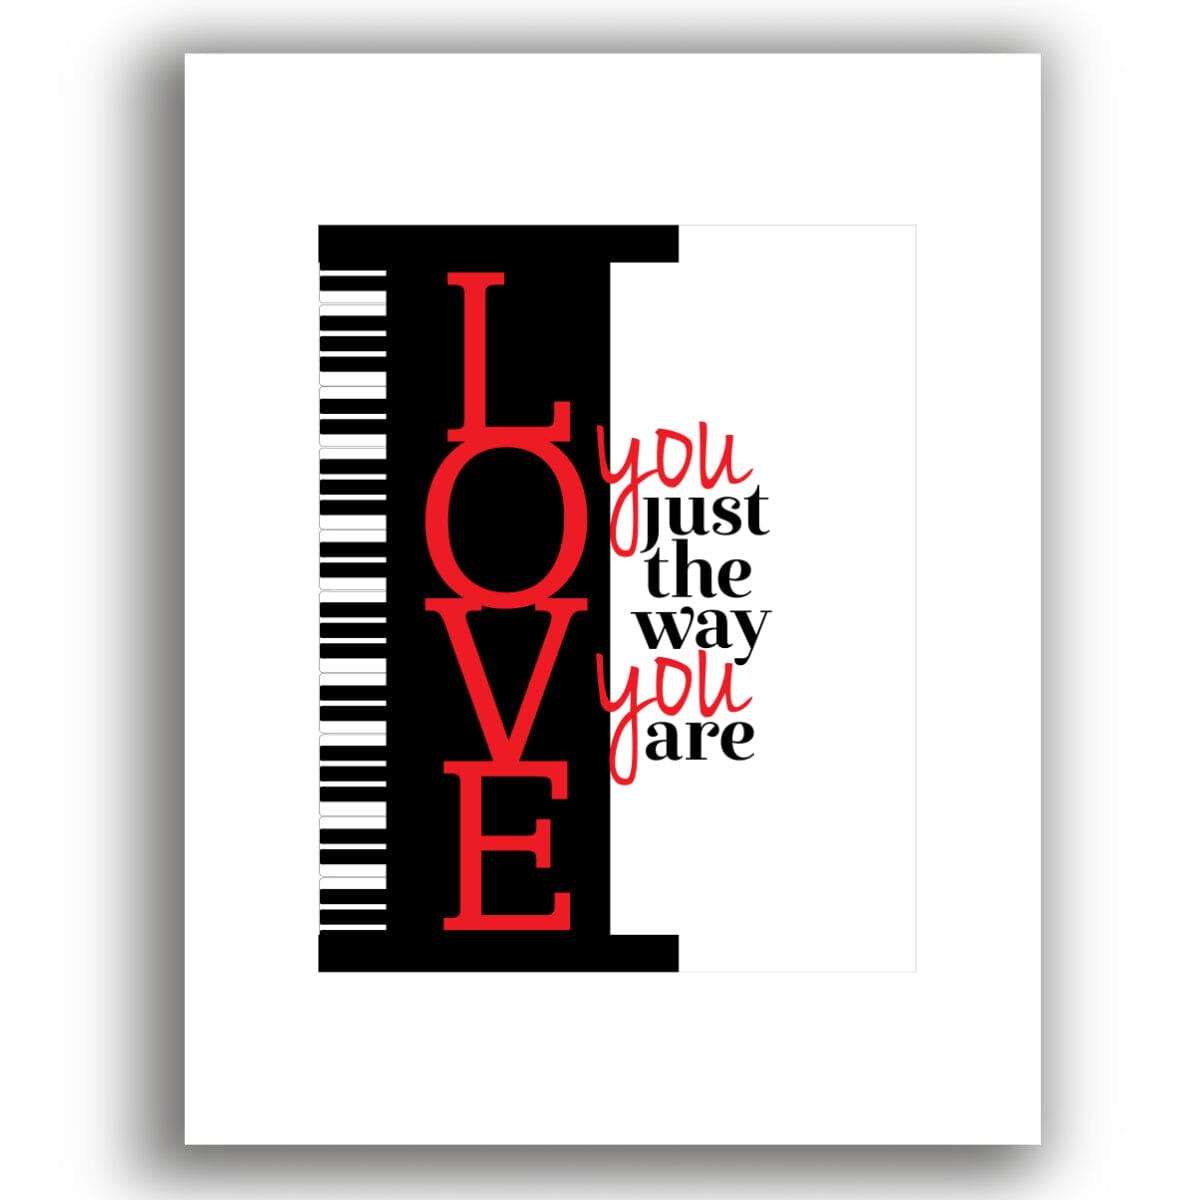 I Love You Just the Way You Are by Billy Joel - Lyrics Art Song Lyrics Art Song Lyrics Art 8x10 White Matted Print 